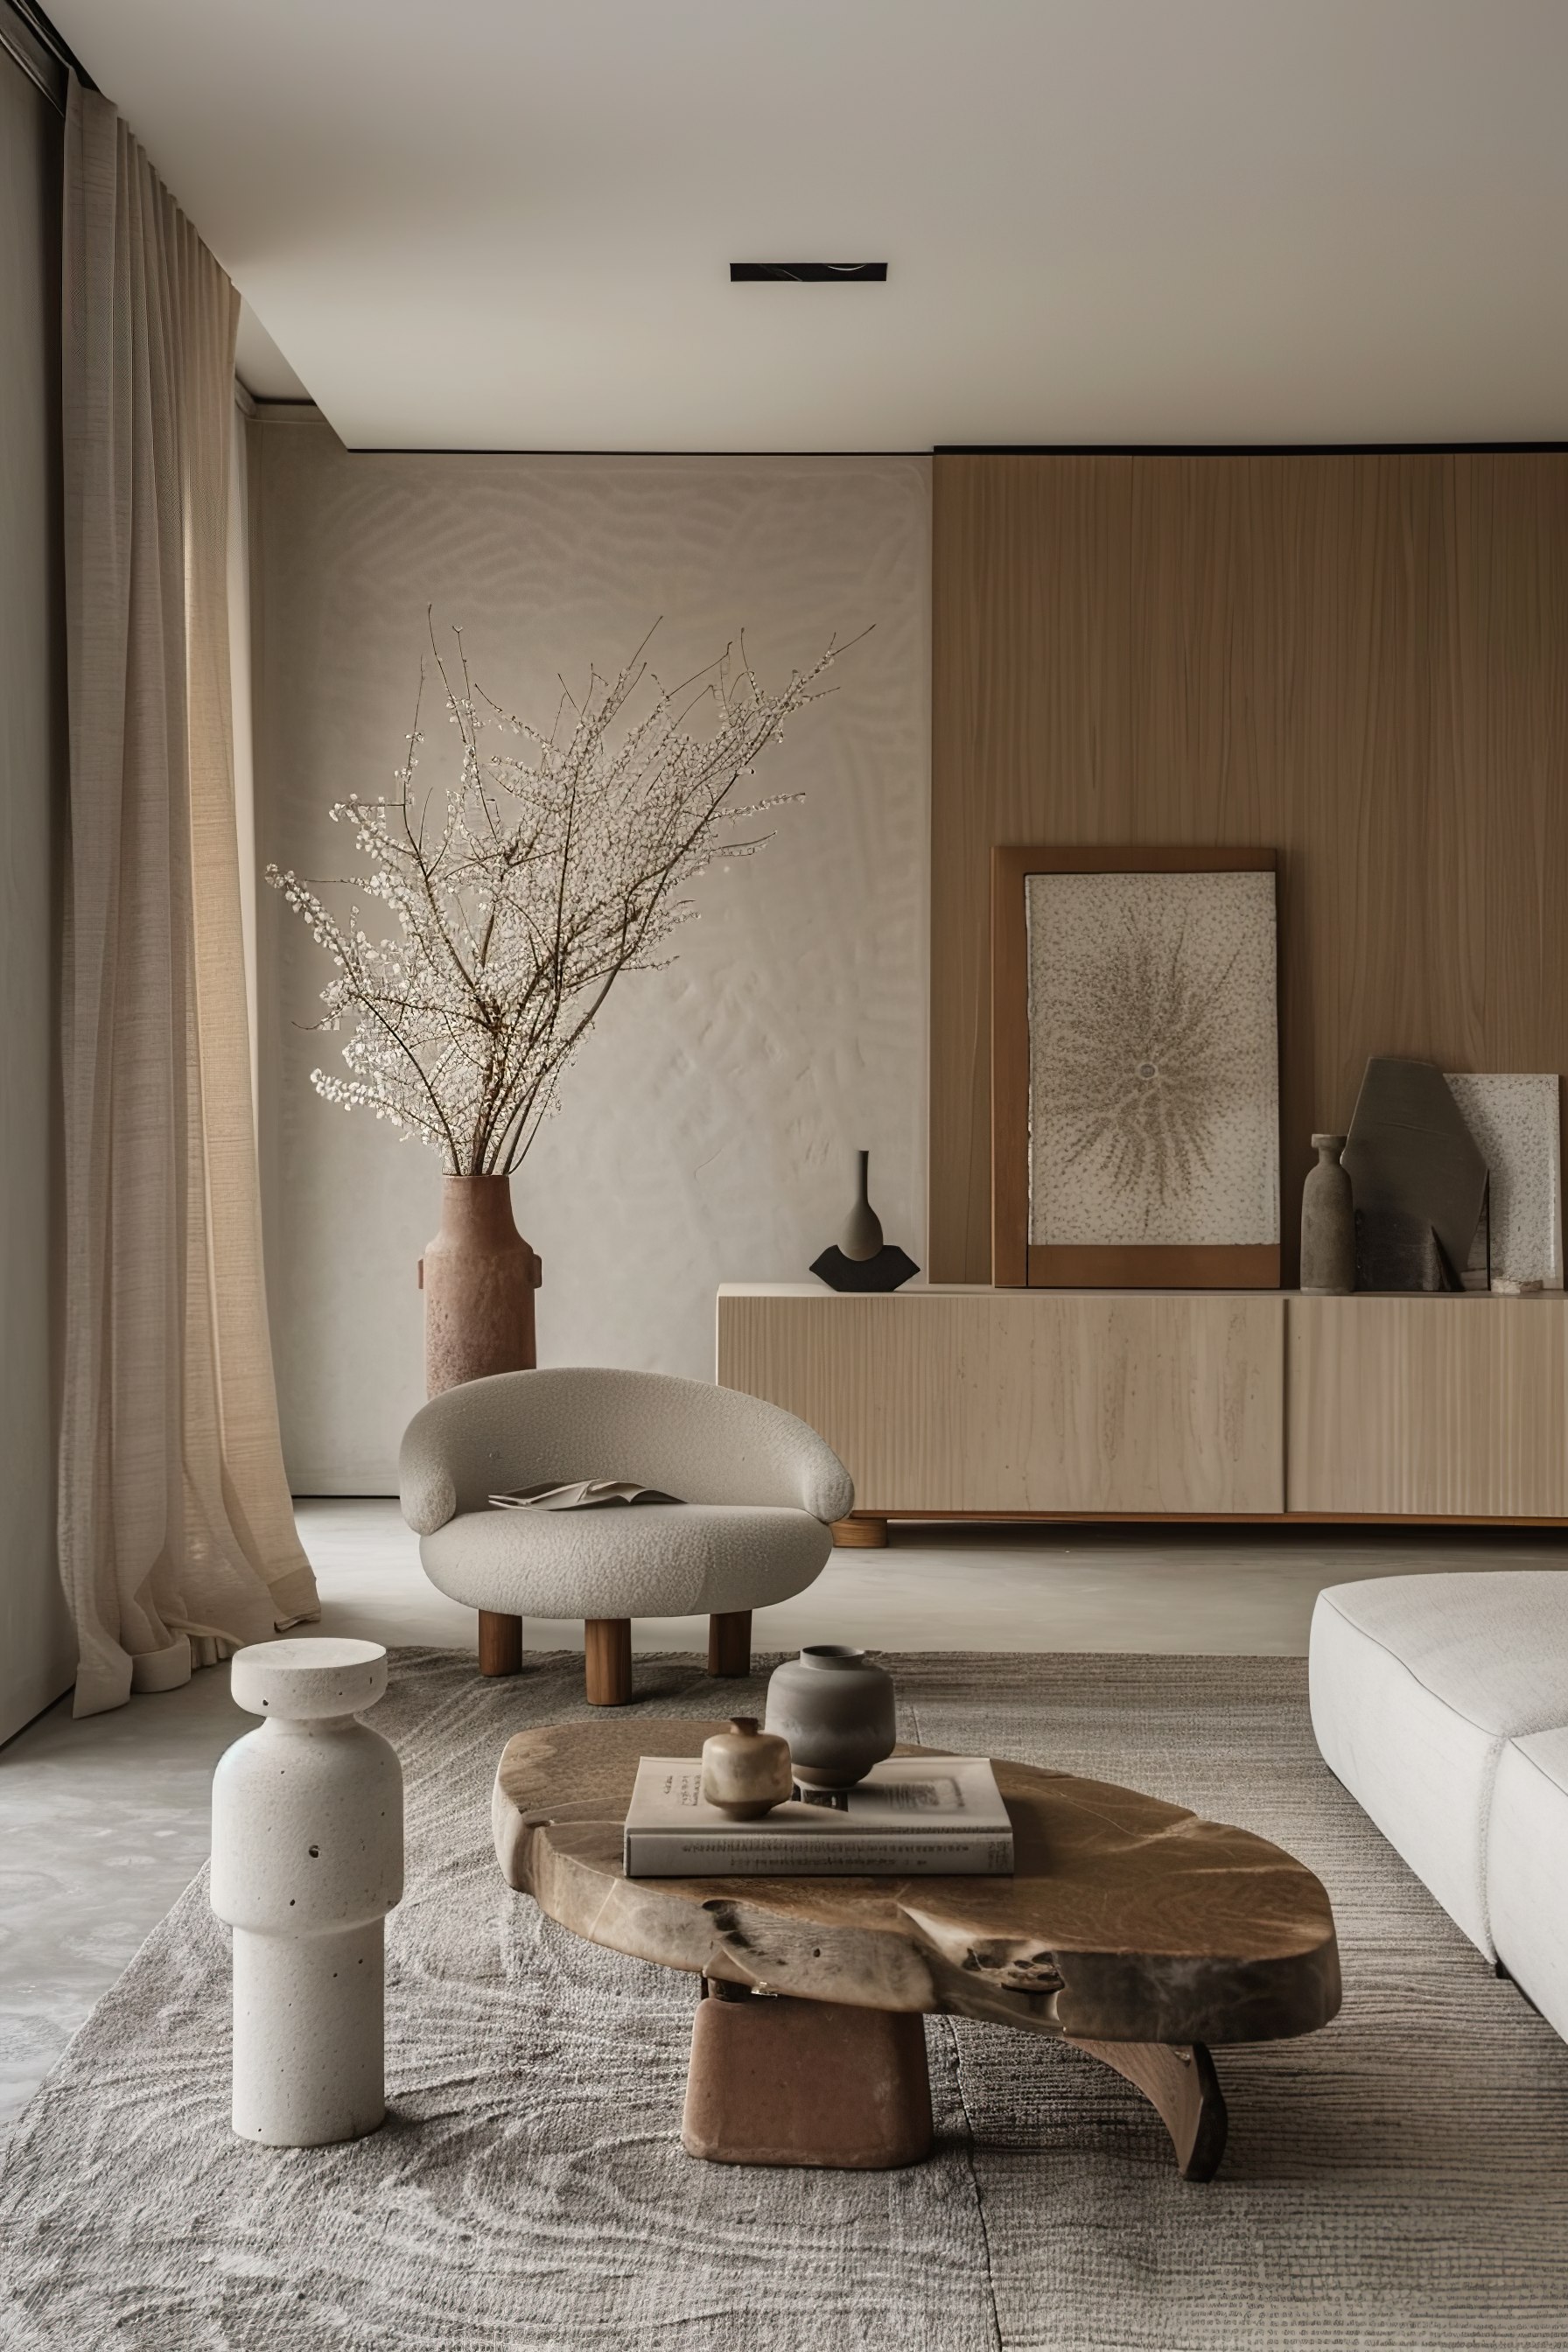 Modern living room with neutral tones, wooden furniture, textured rug, and vase with blossoming branches.